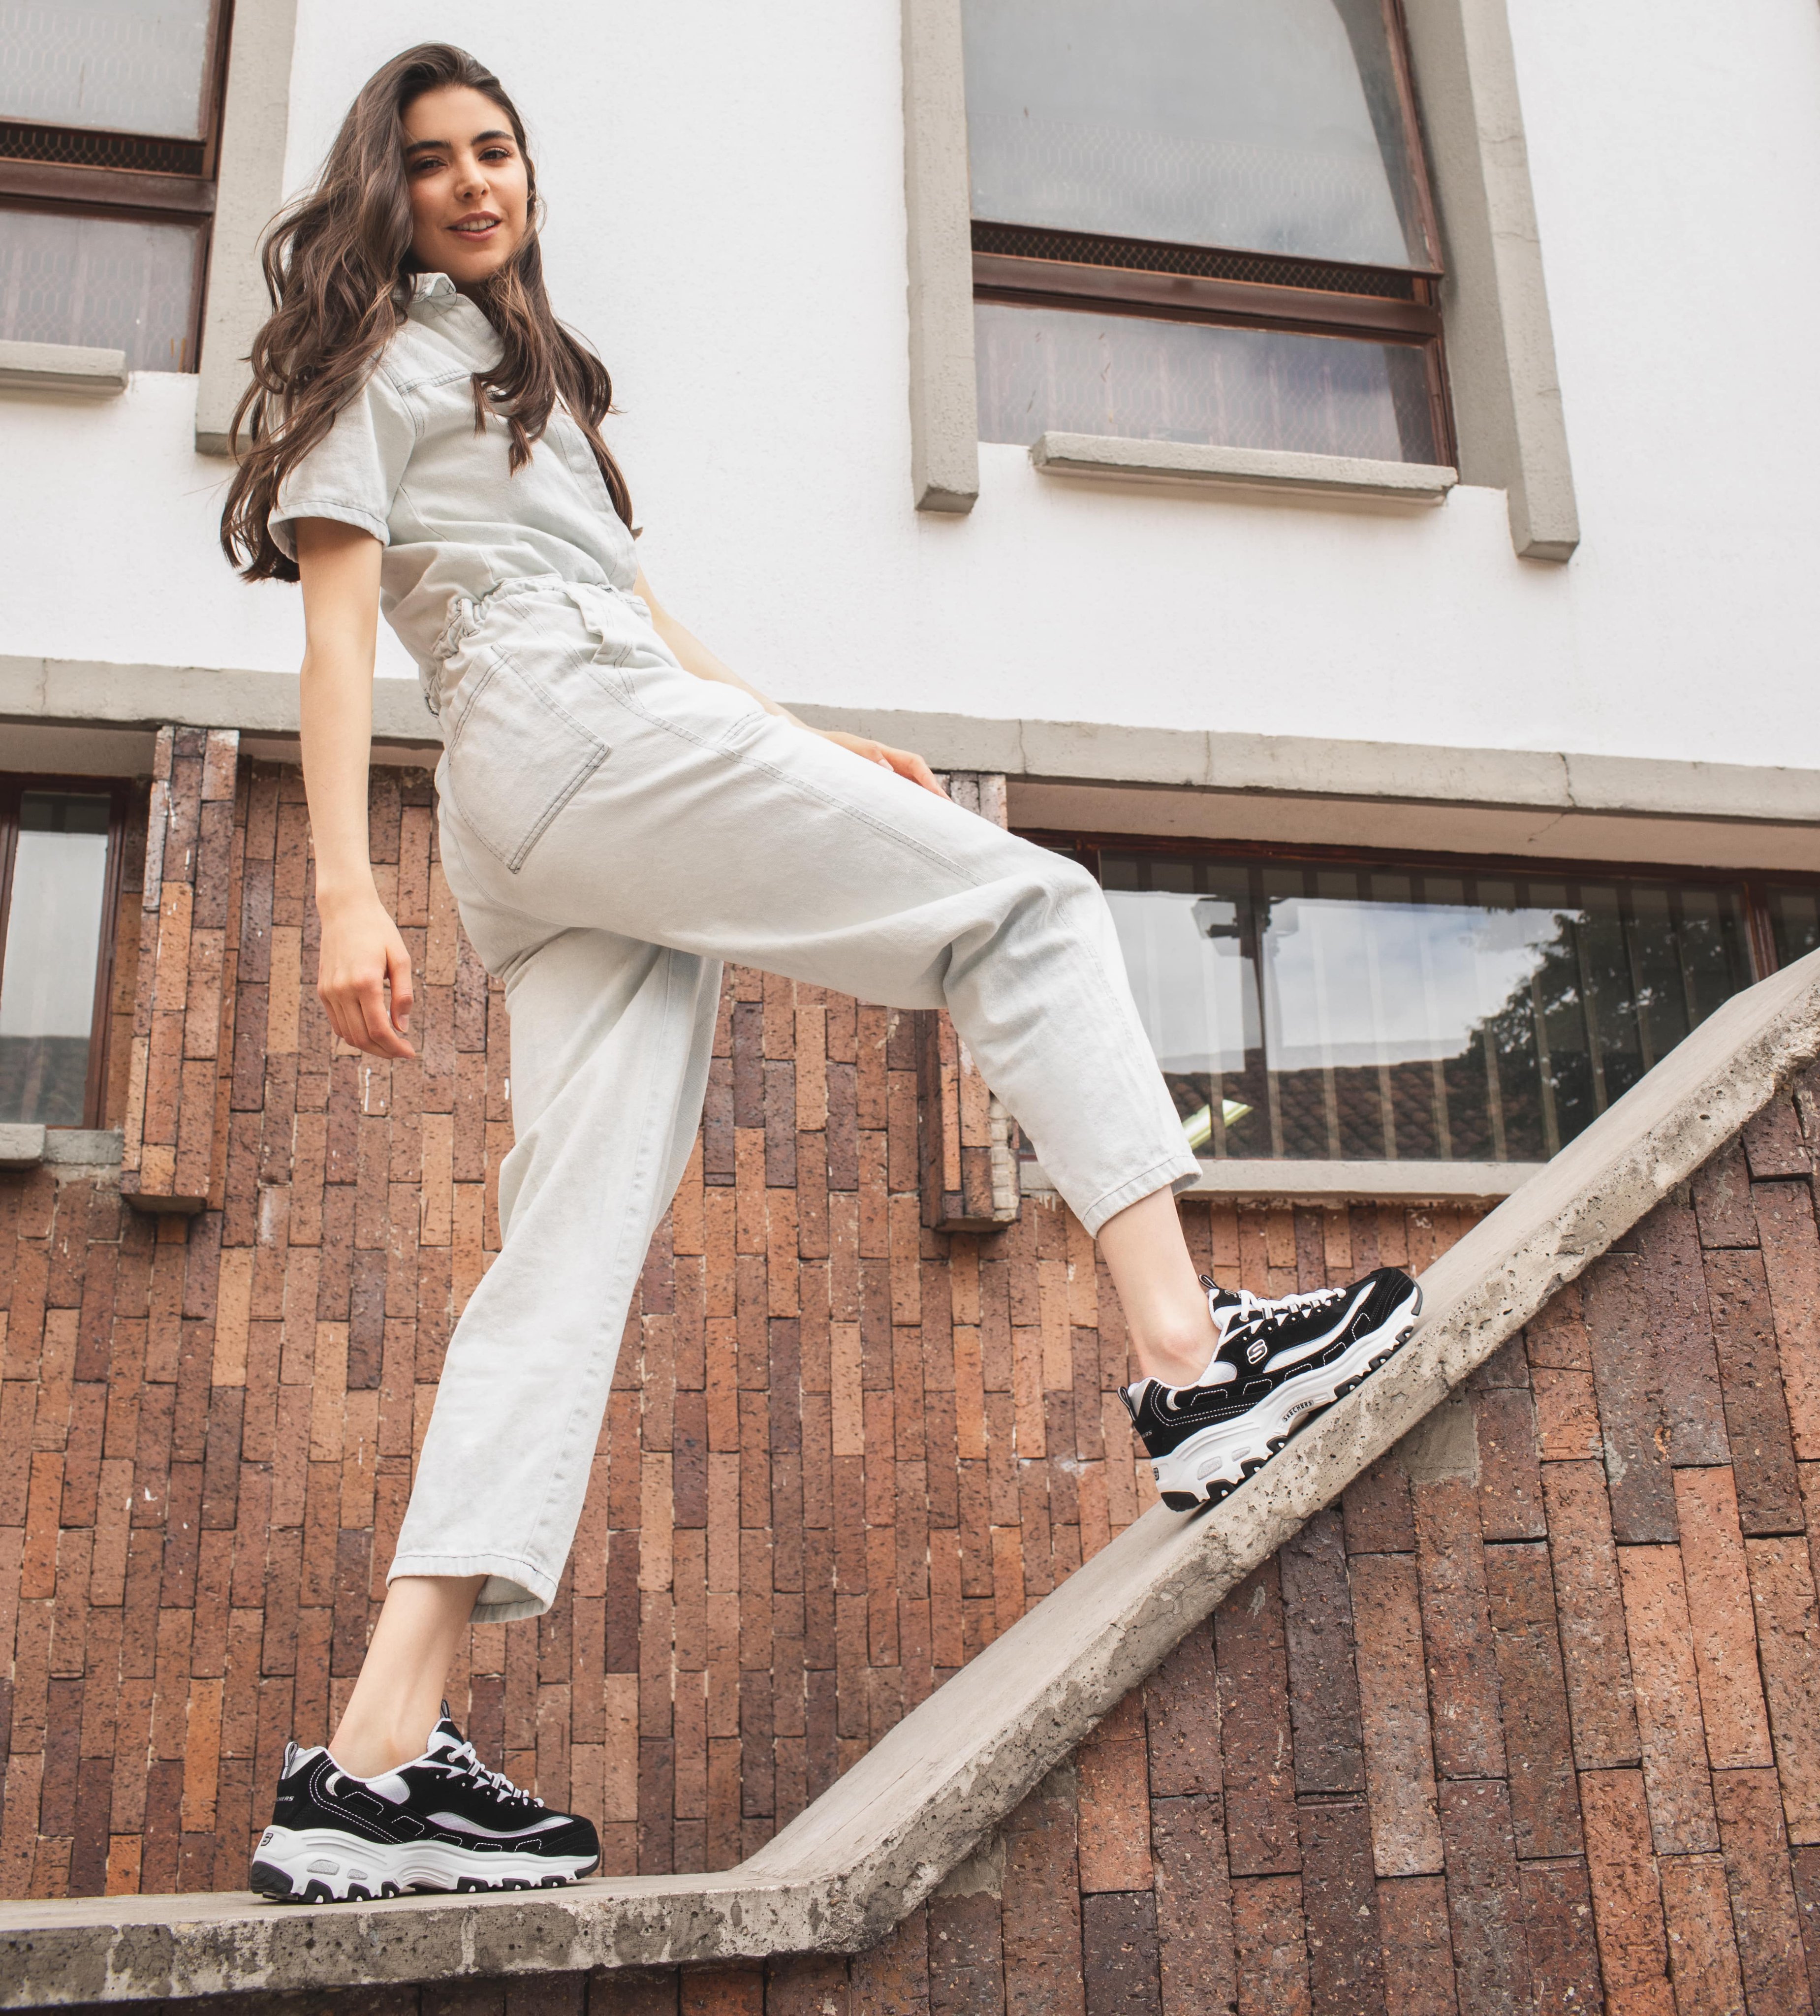 Skechers Philippines on X: On the edge of classic comfort and style–D'Lites  Biggest Fan 🖤 📷@margaritaisaacs Buy 1 and Get 1 pair FREE on selected  styles at any Skechers concept stores nationwide!